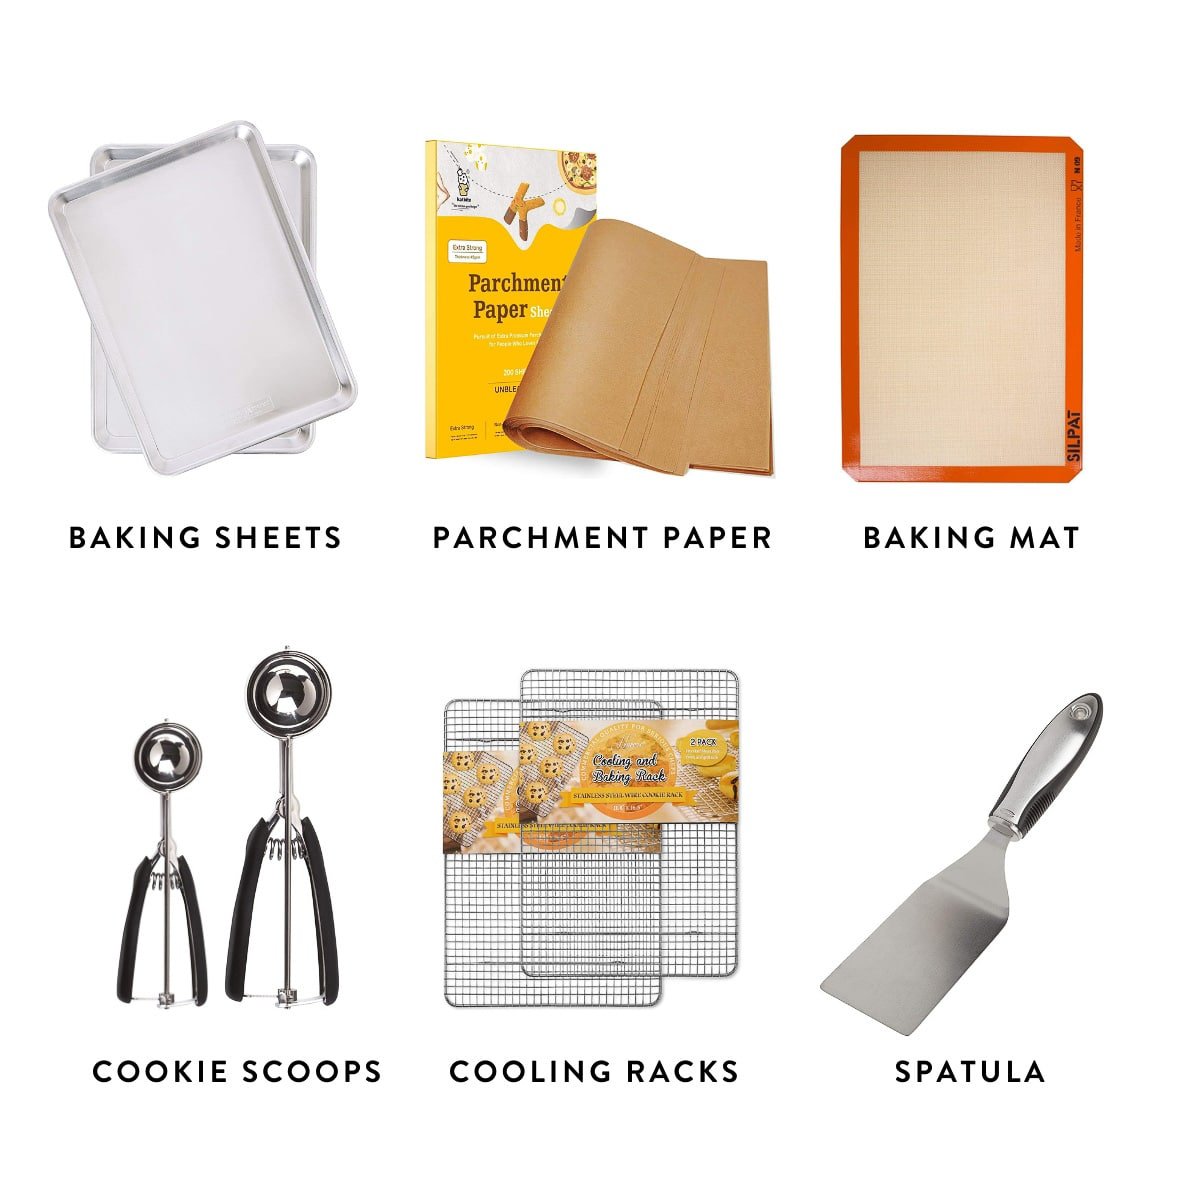 collage of graphics of different baking items including baking sheets, parchment paper, spatula, and cookie scoops.